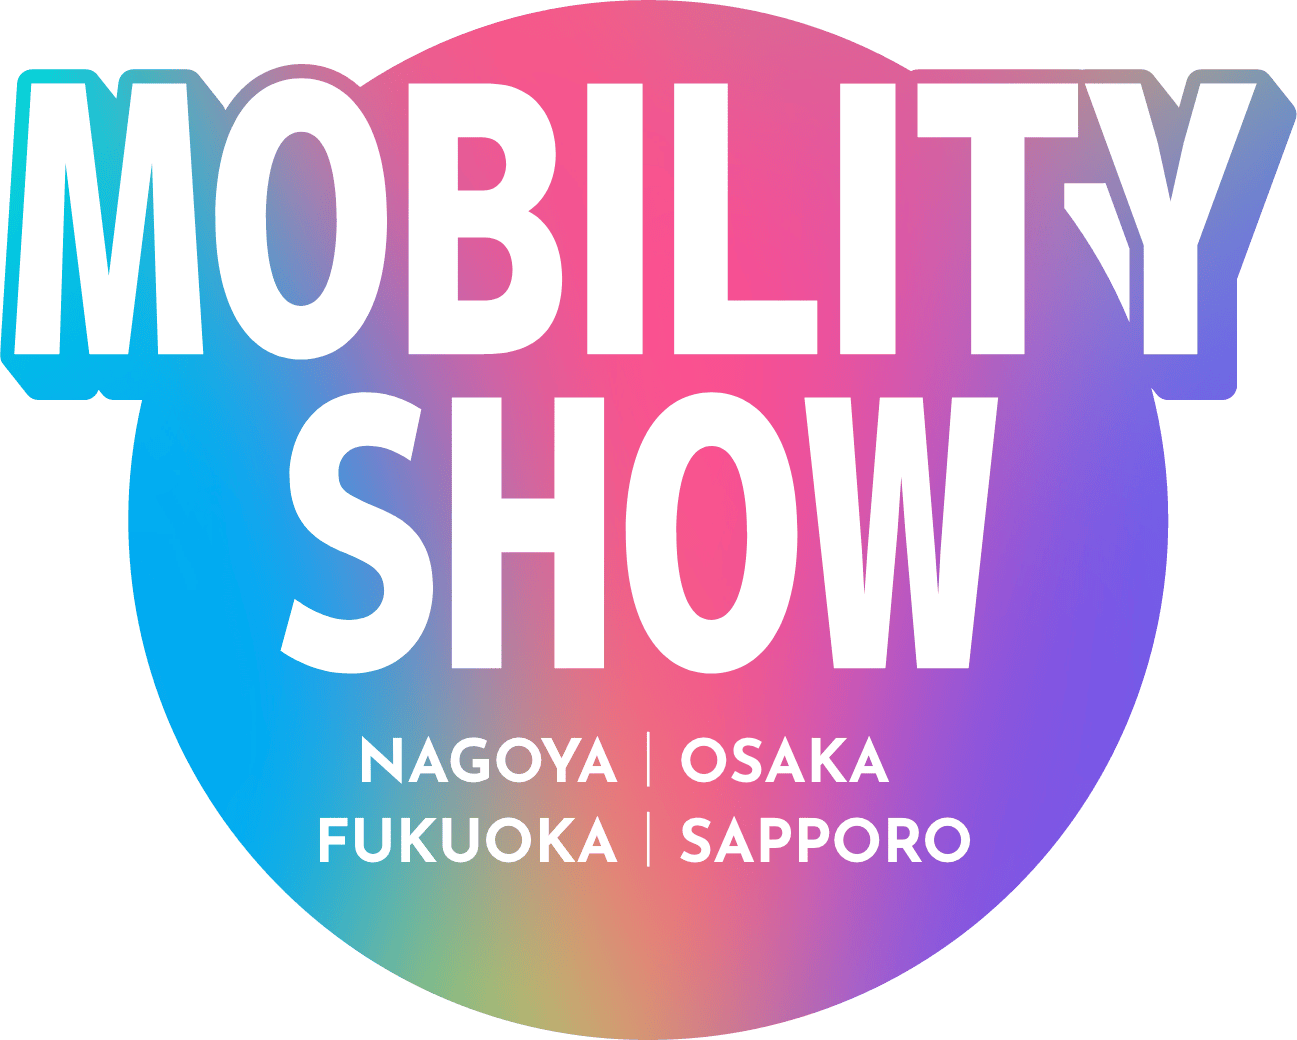 MOBILITY SHOW